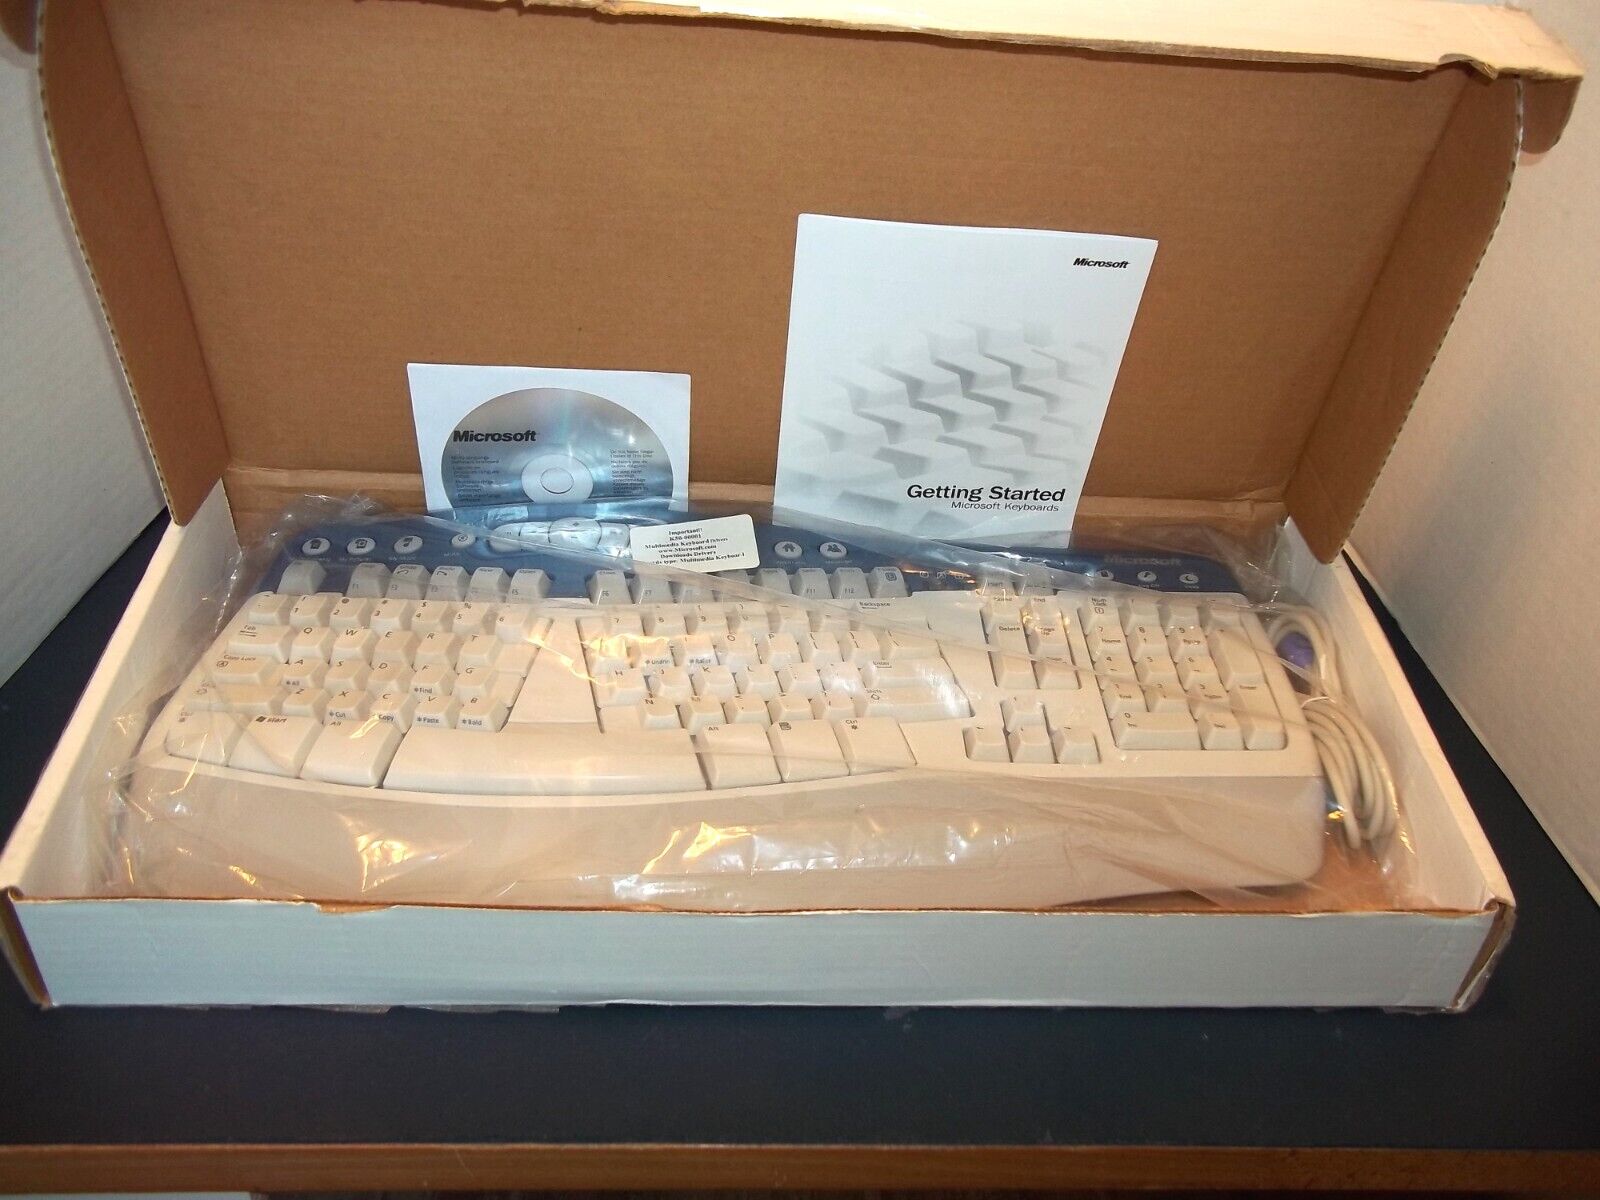 Microsoft Natural Multimedia Keyboard Brand New in Open Box - Never Used